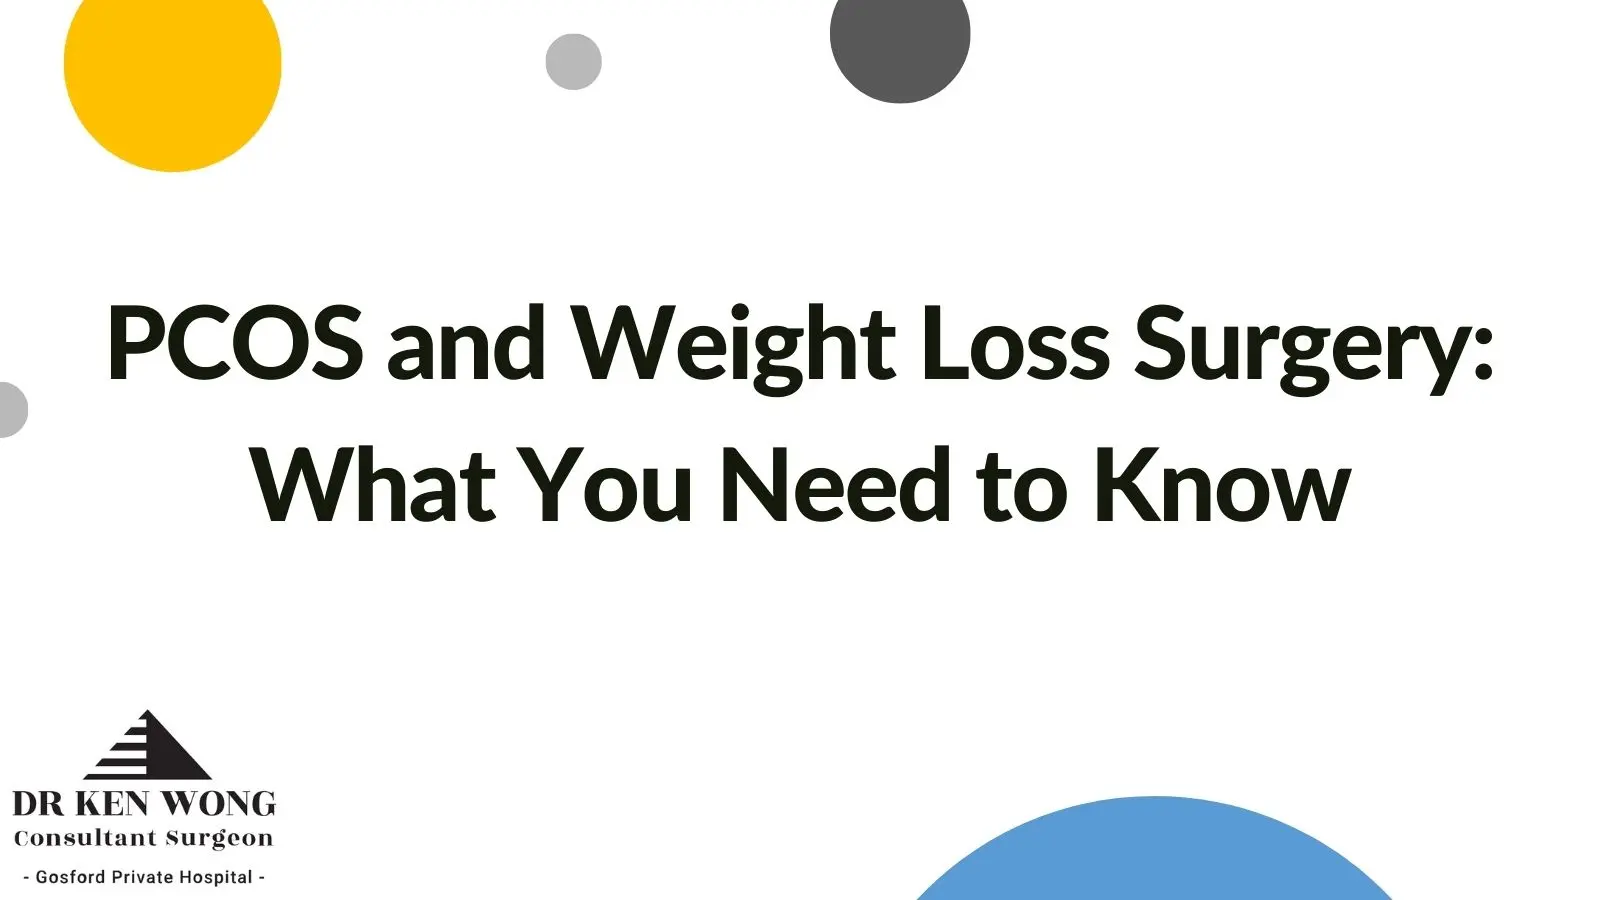 PCOS and Weight Loss Surgery